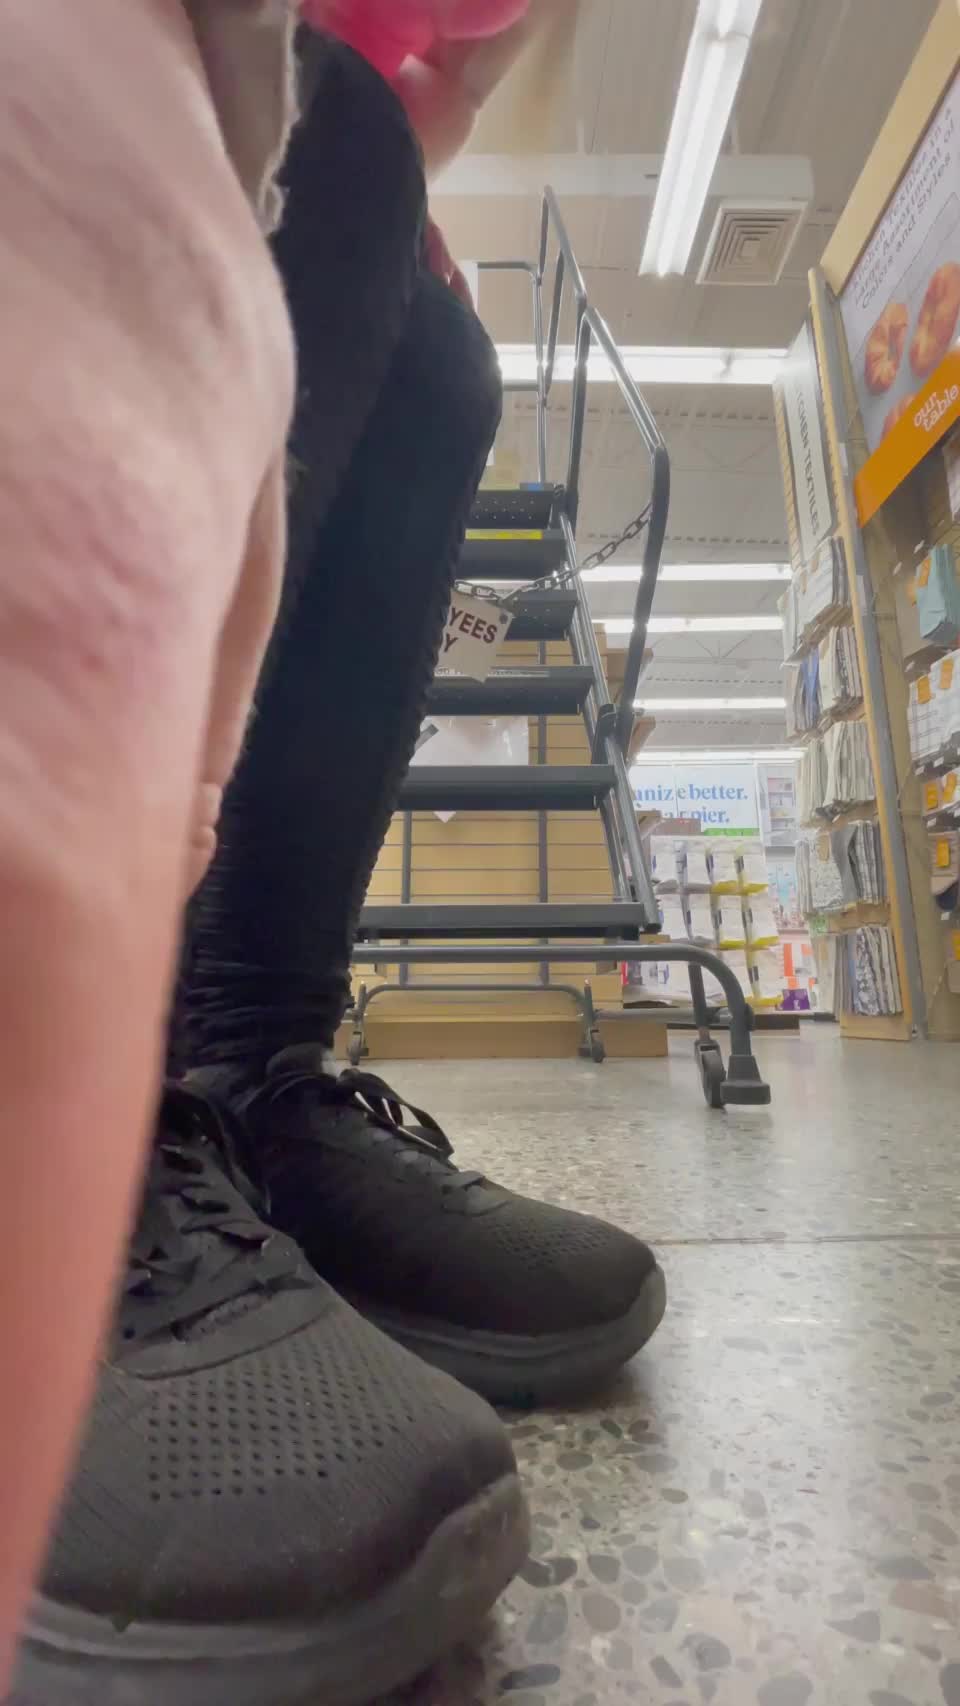 Had a chance to film a fun little flash at the mall 😉 [gif] : video clip